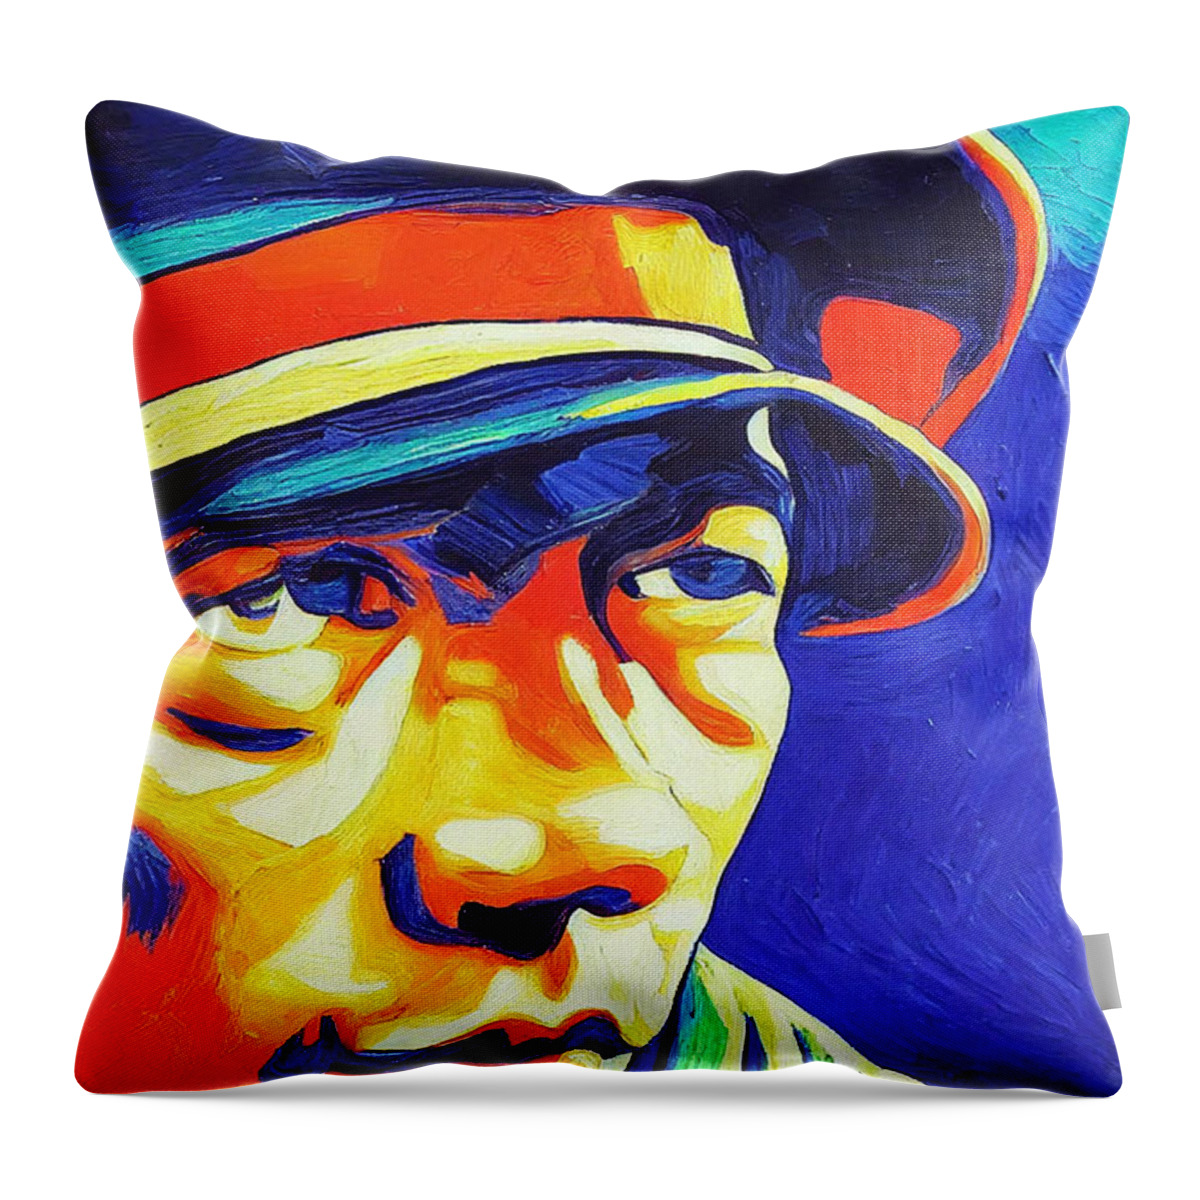 Mickey Mantle Oil Painting In The Style Décor Throw Pillow featuring the painting MICKEY MANTLE oil painting in the style inspire 0432c53703 3e6459 6450432d 04364535 ab55 by Celestial Images